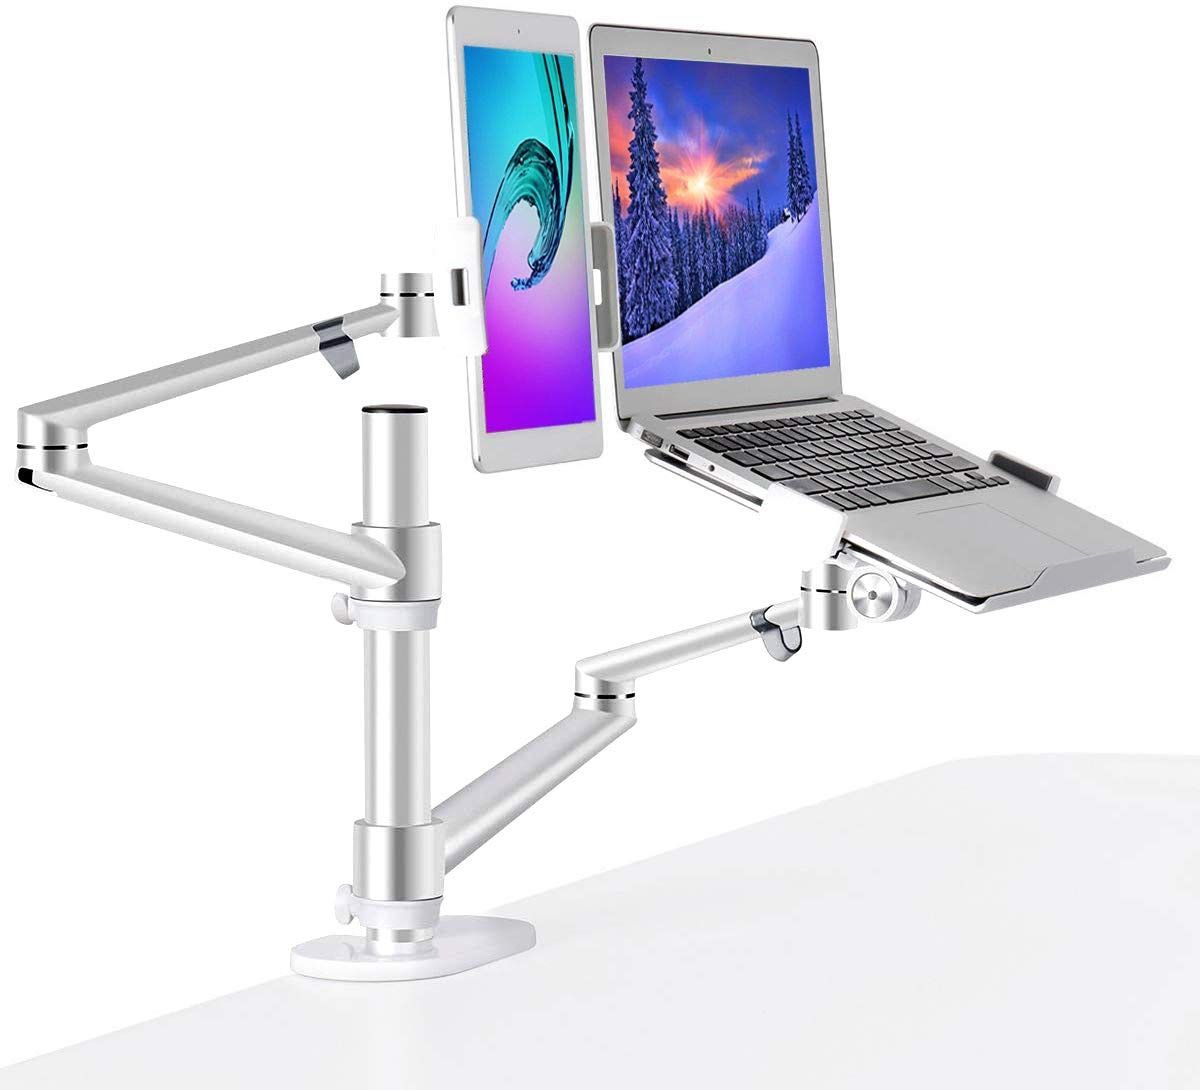 MagicHold Adjustable 3 in 1 Stand for Laptop, Monitor, Tablet, 360 Rotating, Height Adjustable, VESA